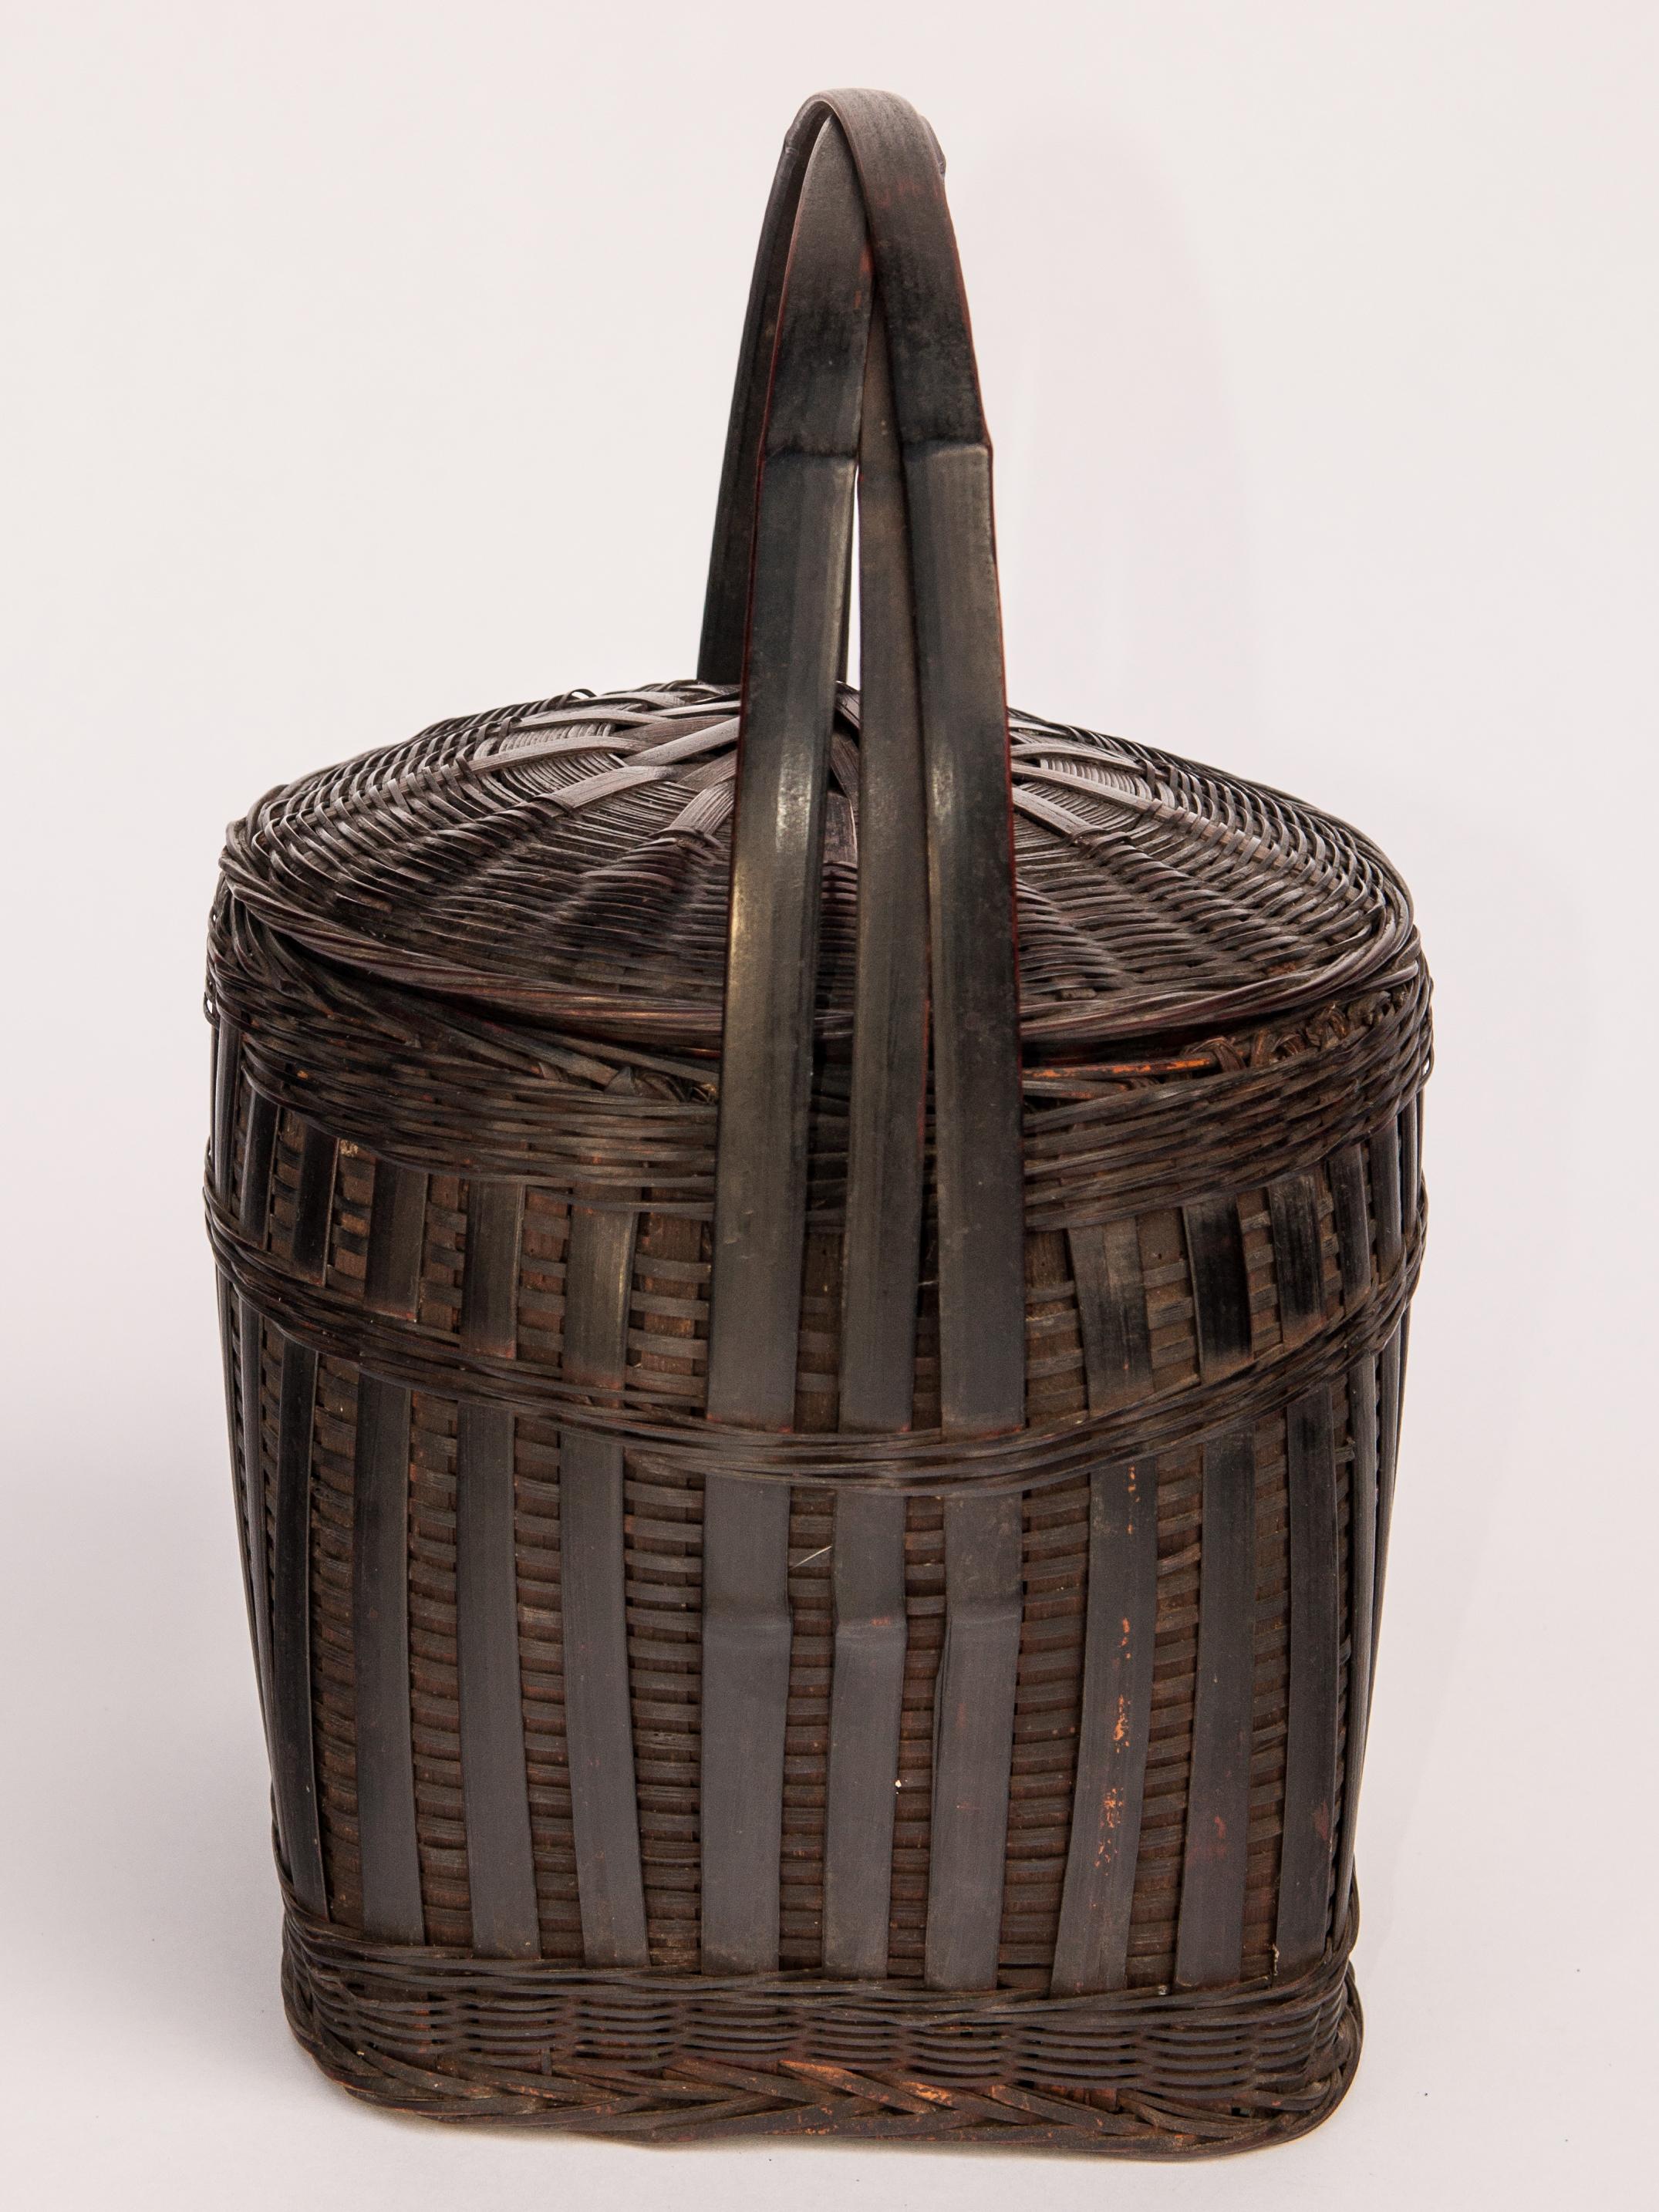 Chinese Hmong Storage Basket with Lid and Handle, Guizhou, China, Mid-20th Century